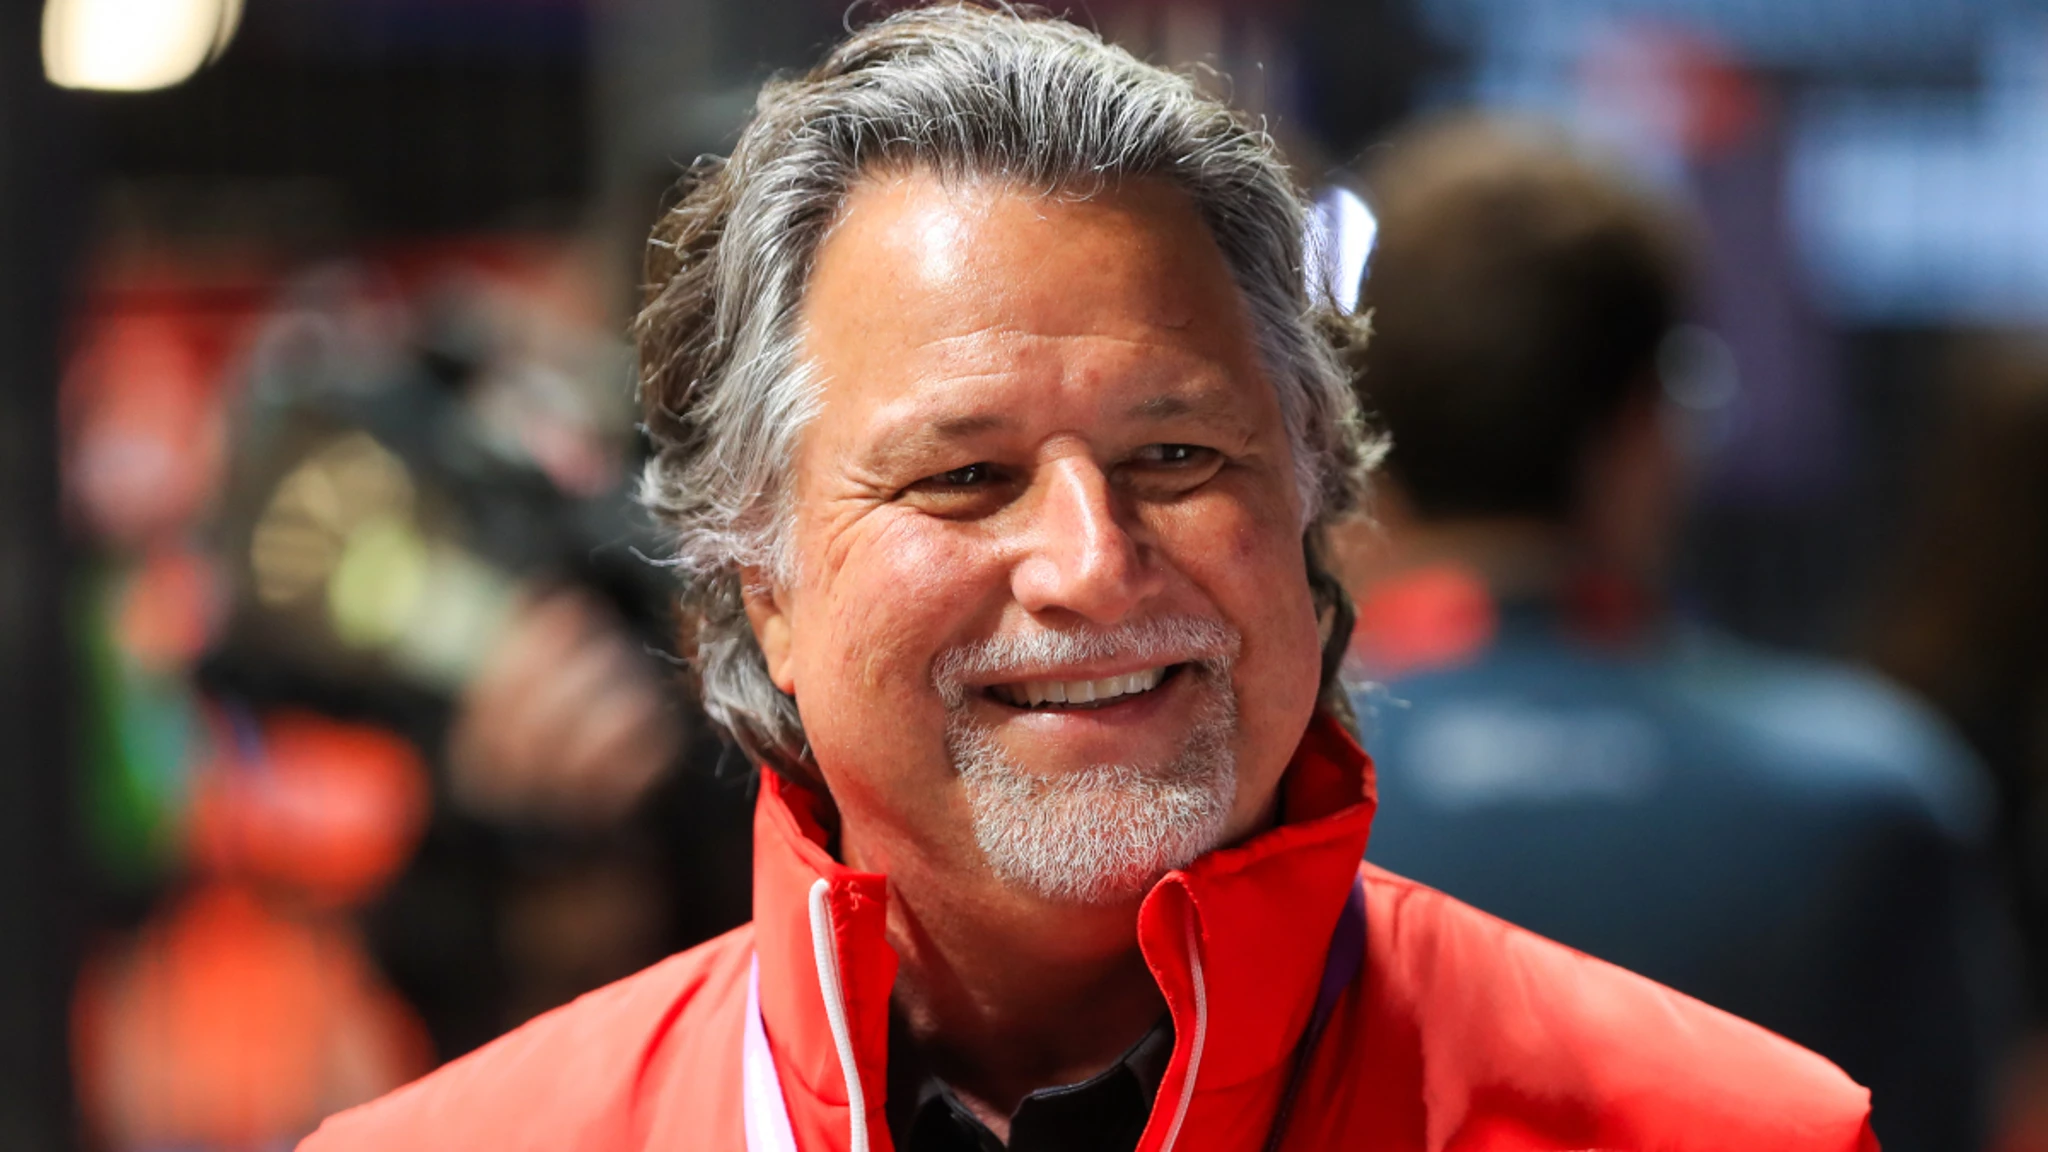 Andretti hits back at negativity and says they will boost the sport ...